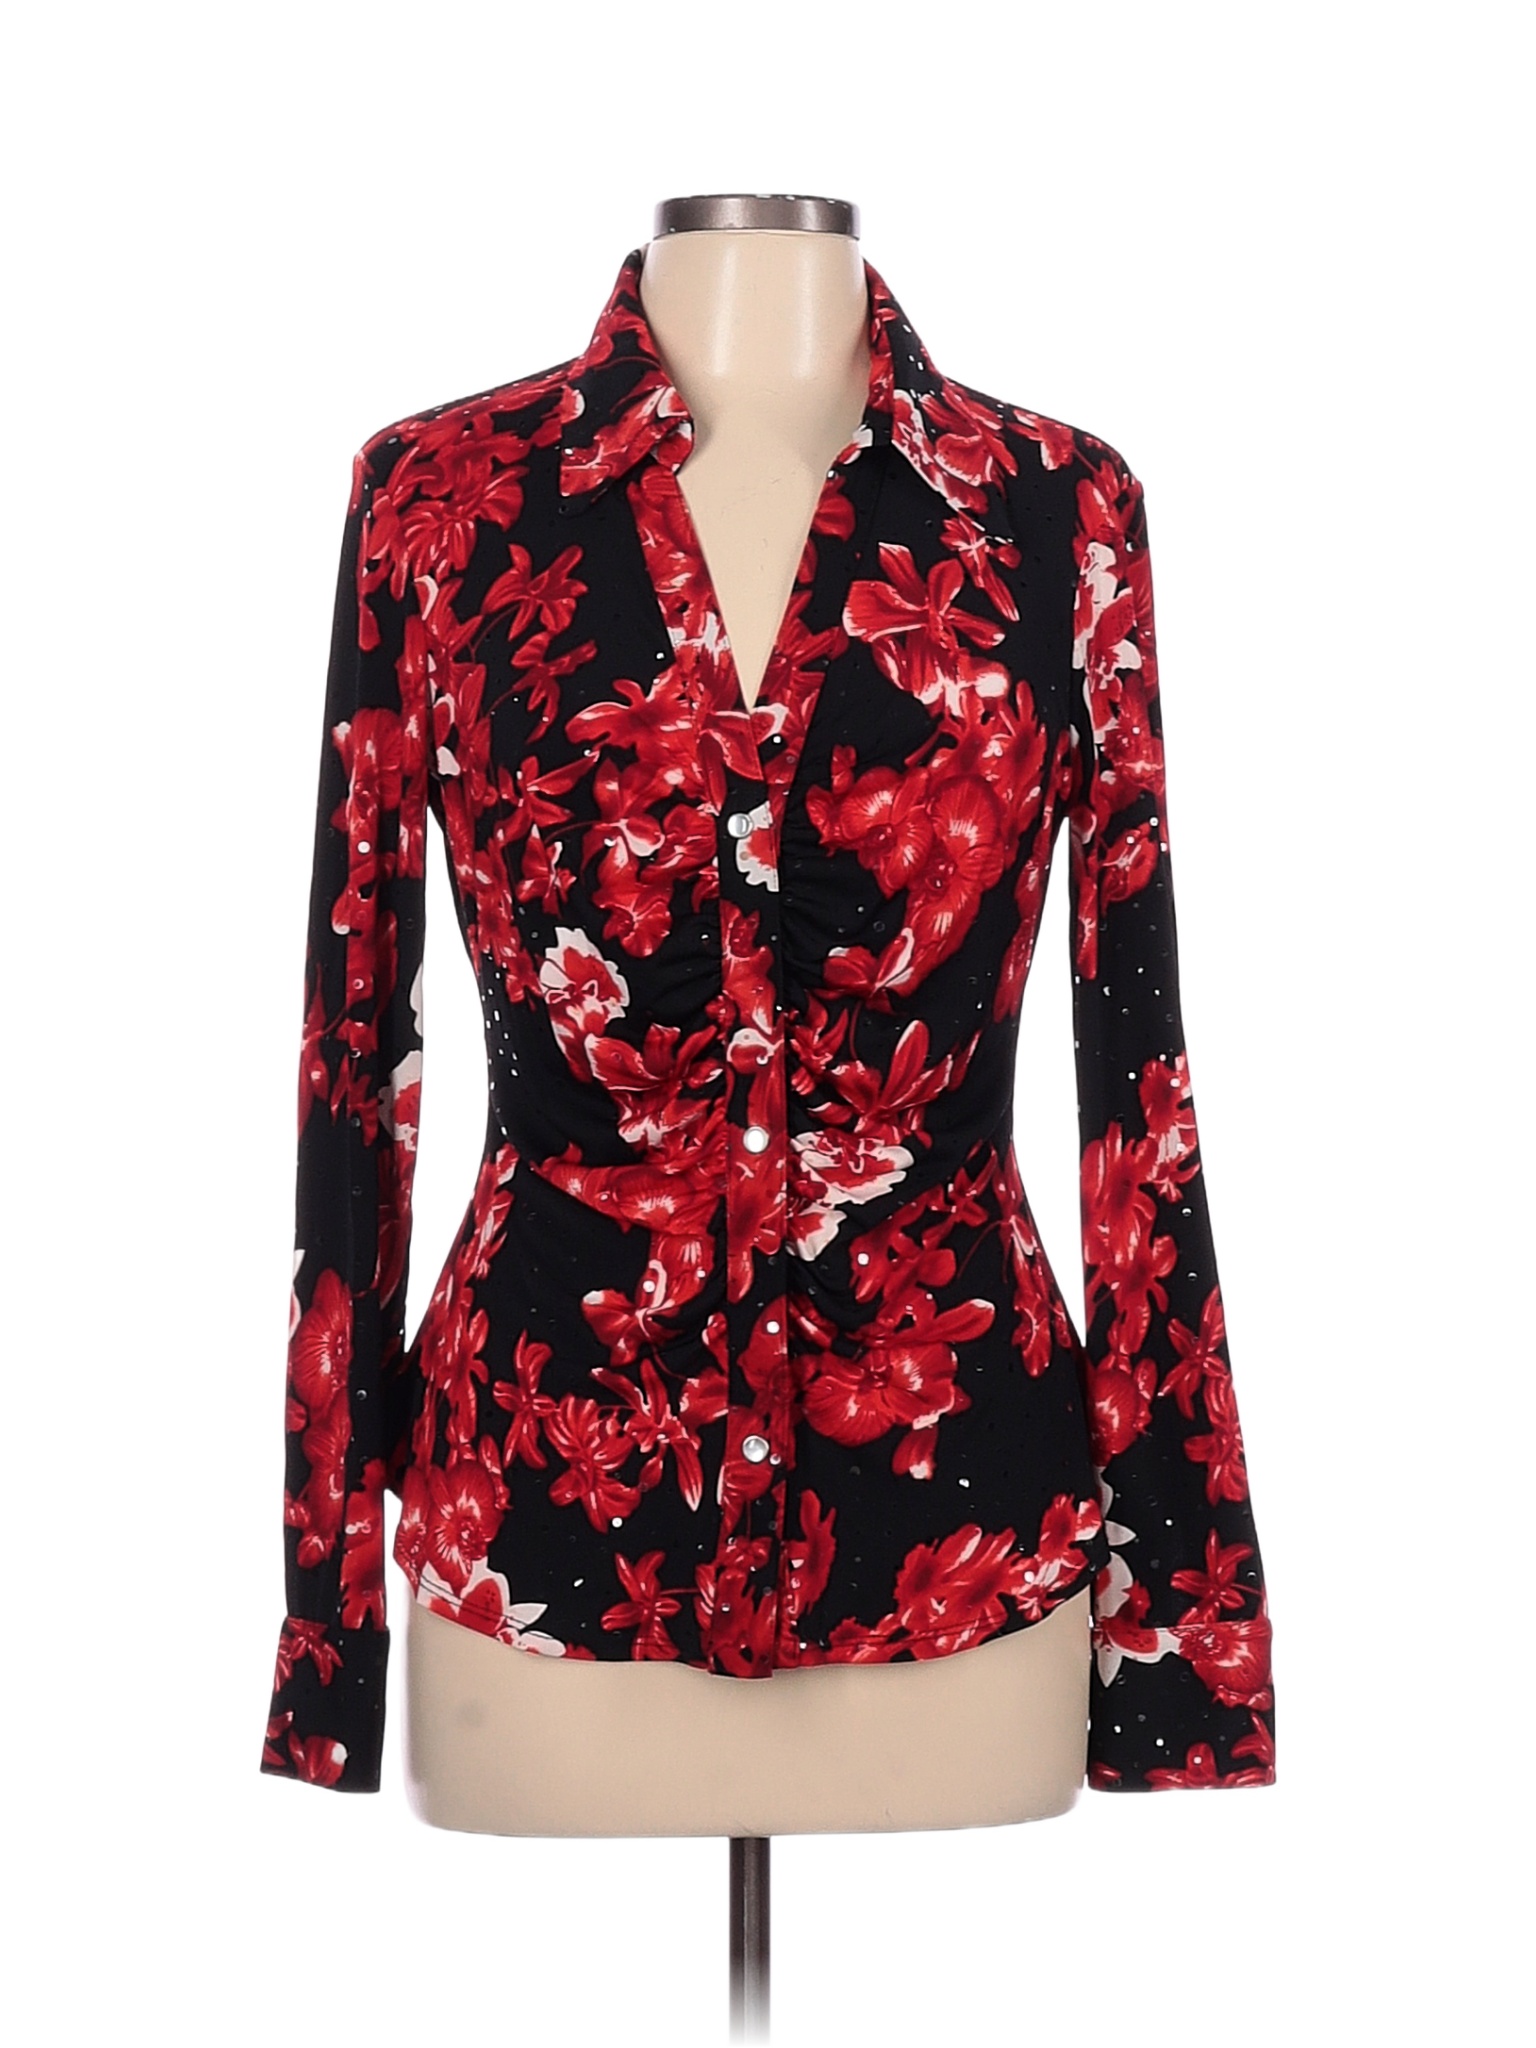 Cache Floral Red Long Sleeve Top Size L - 70% off | thredUP